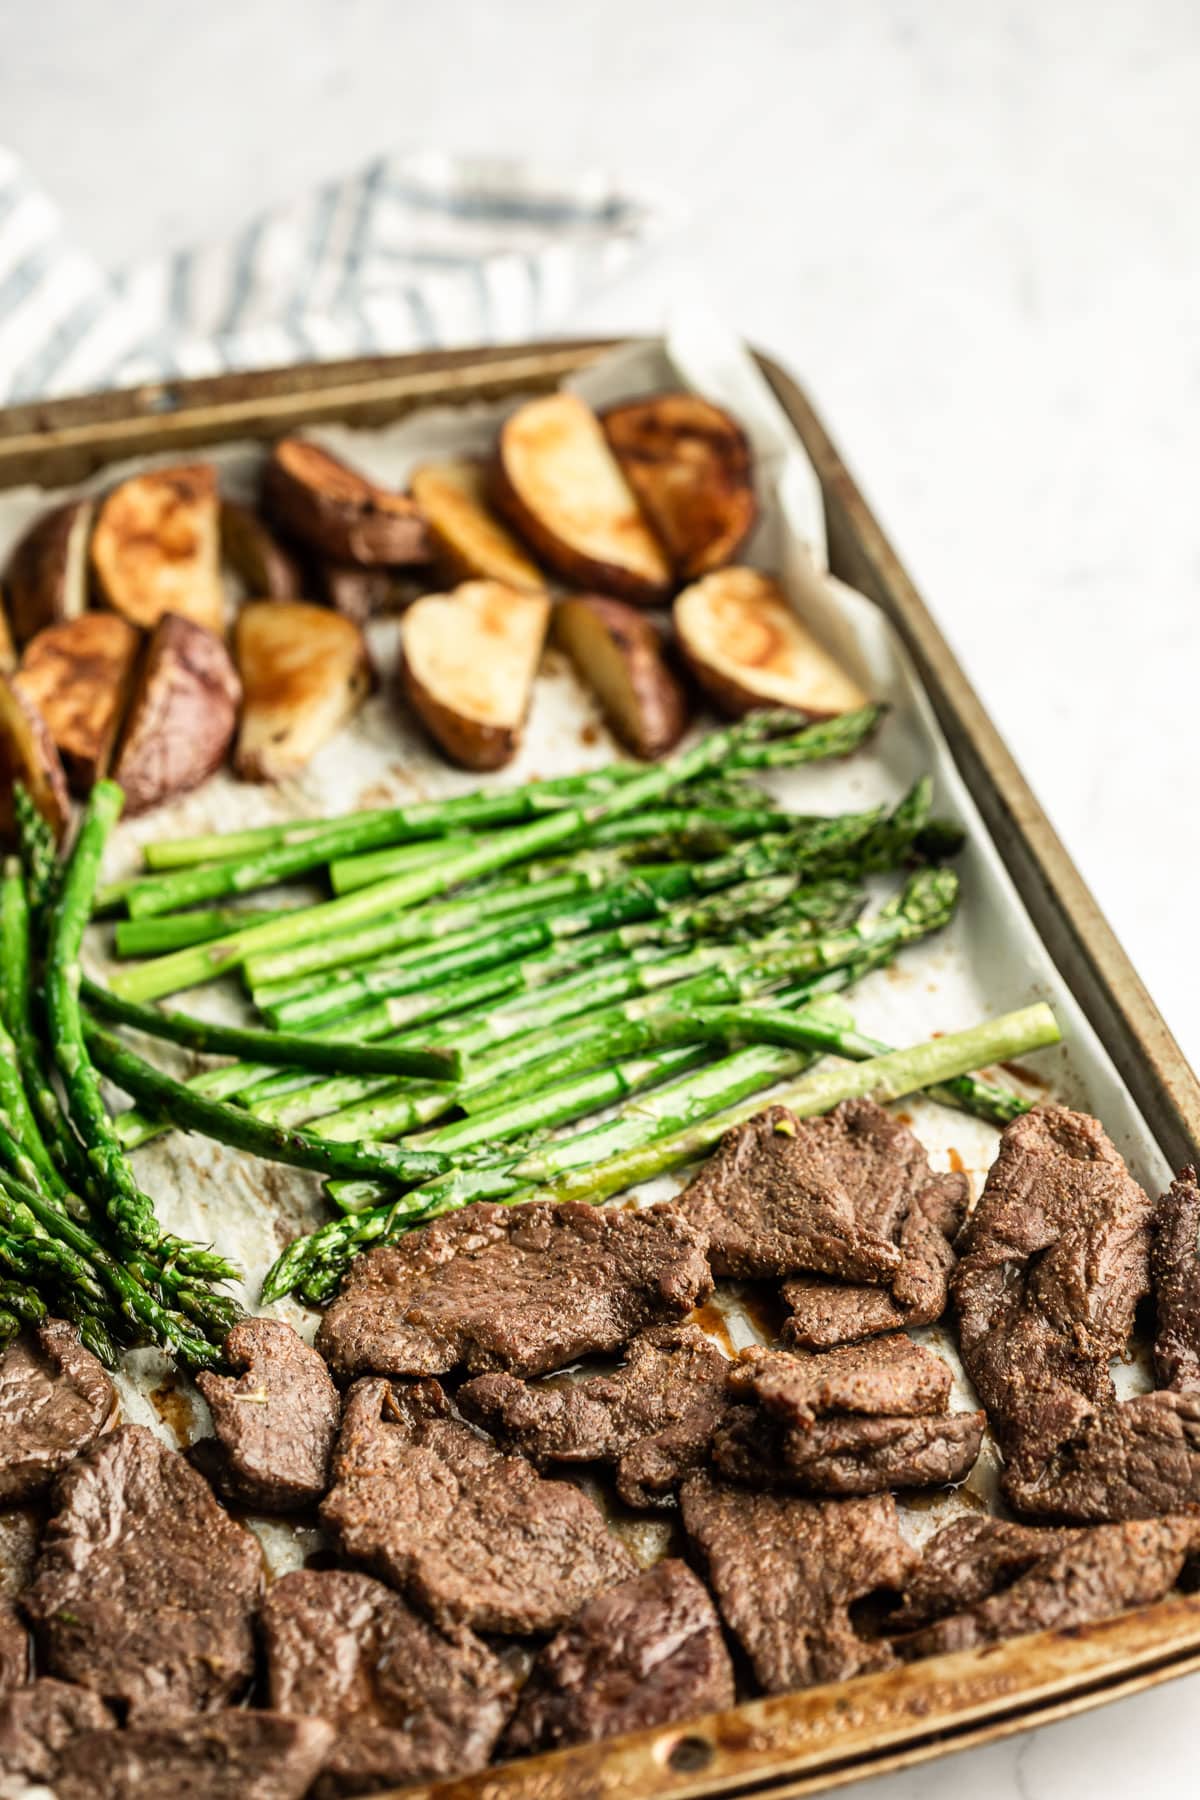 Easy Sheet Pan Steak Dinner - The Whole Cook